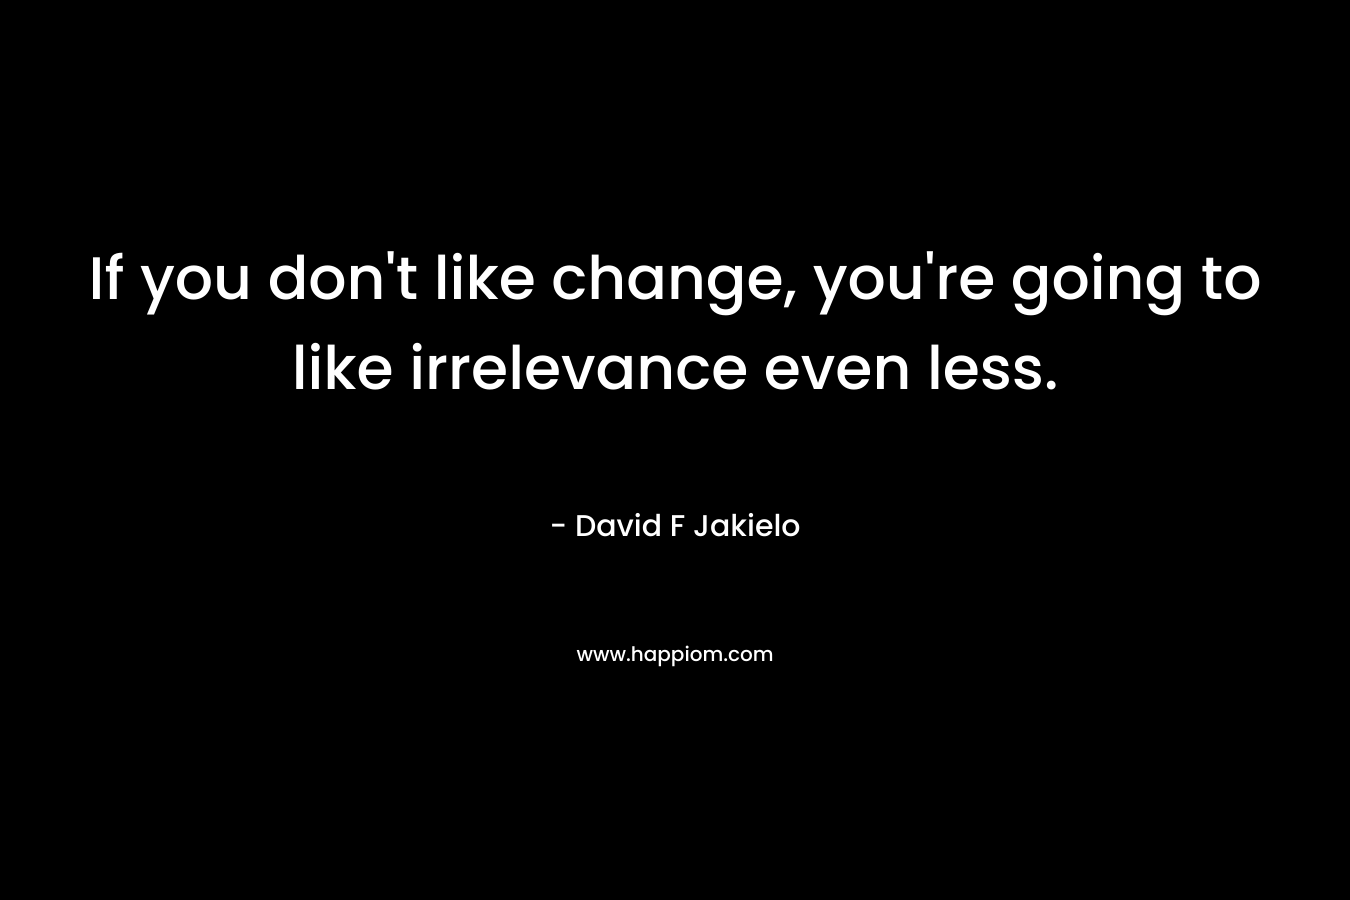 If you don't like change, you're going to like irrelevance even less.